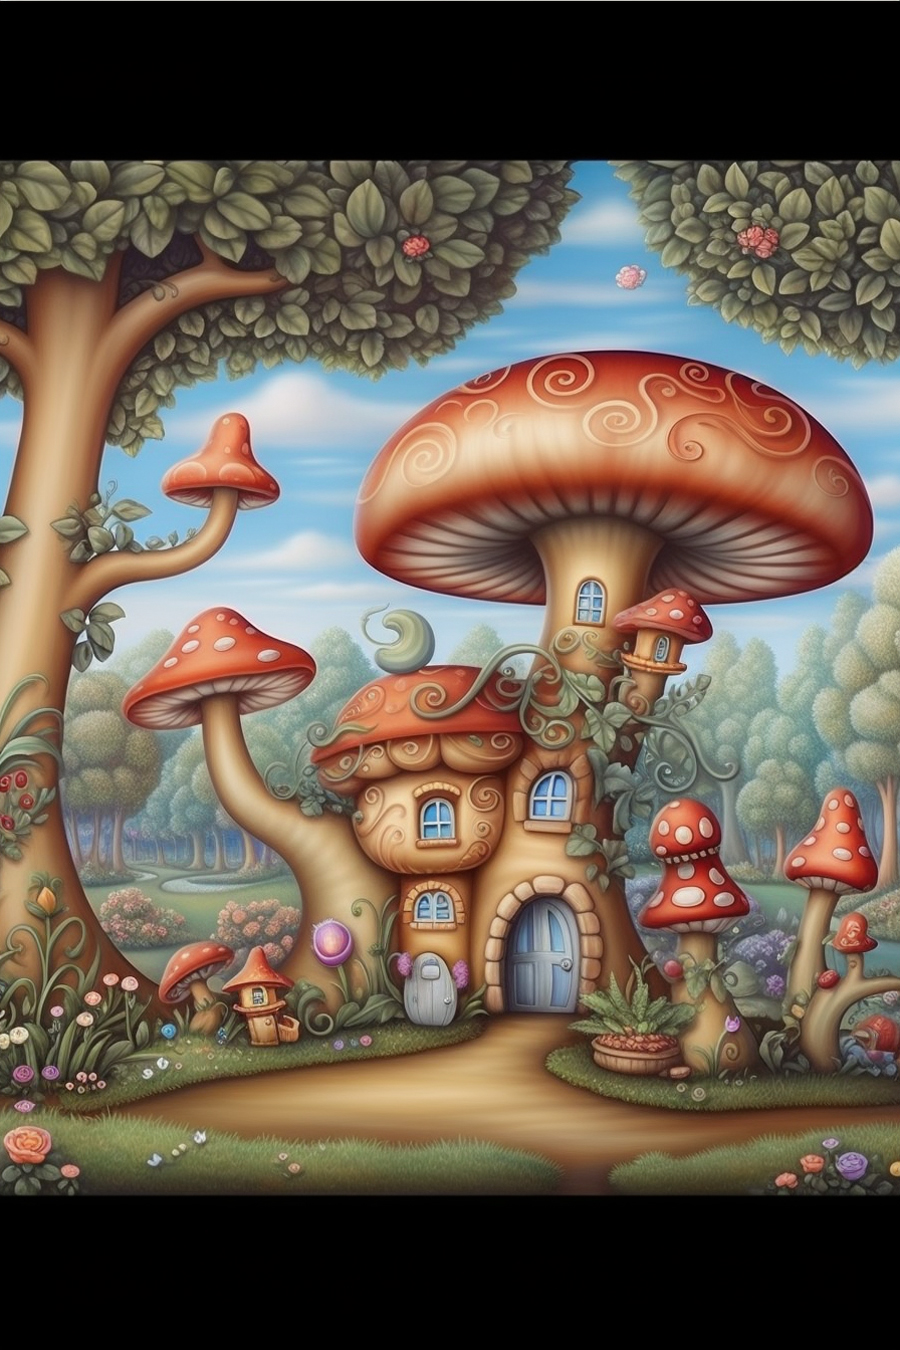 A painting of a mushroom house in the forest.